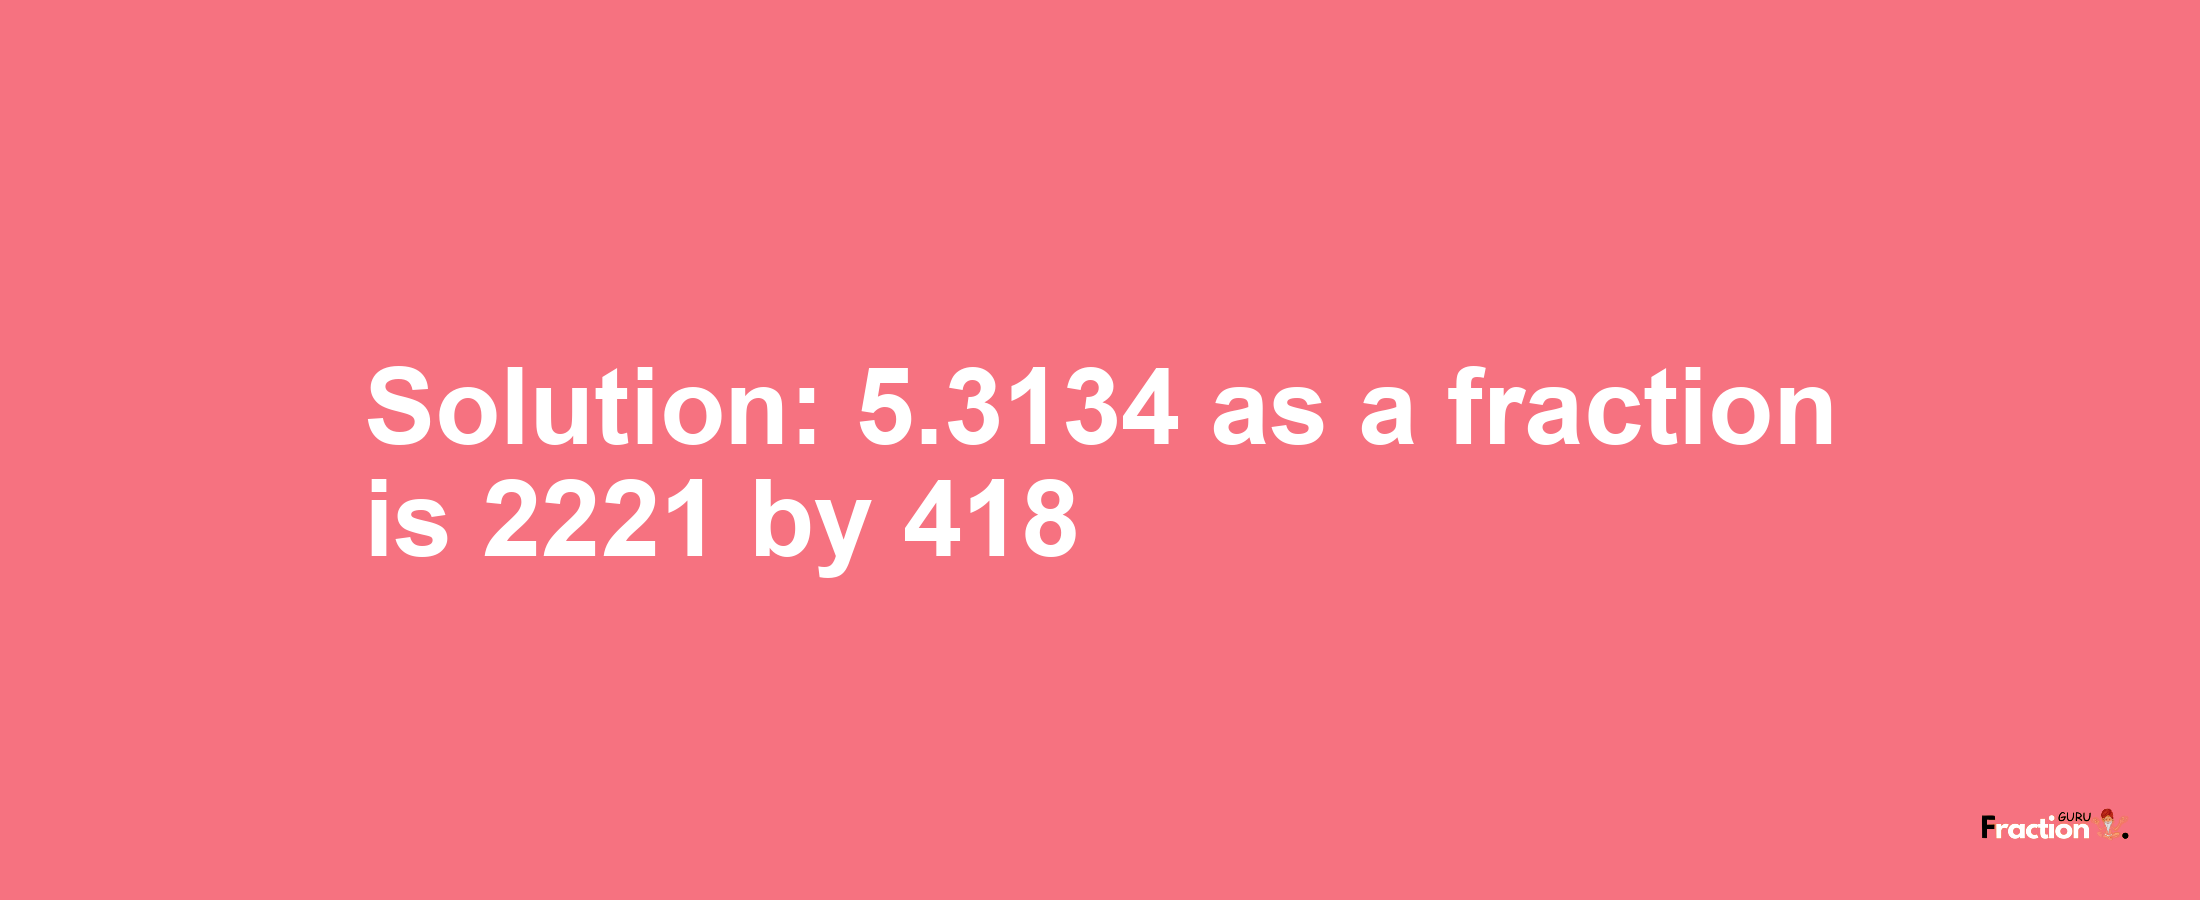 Solution:5.3134 as a fraction is 2221/418